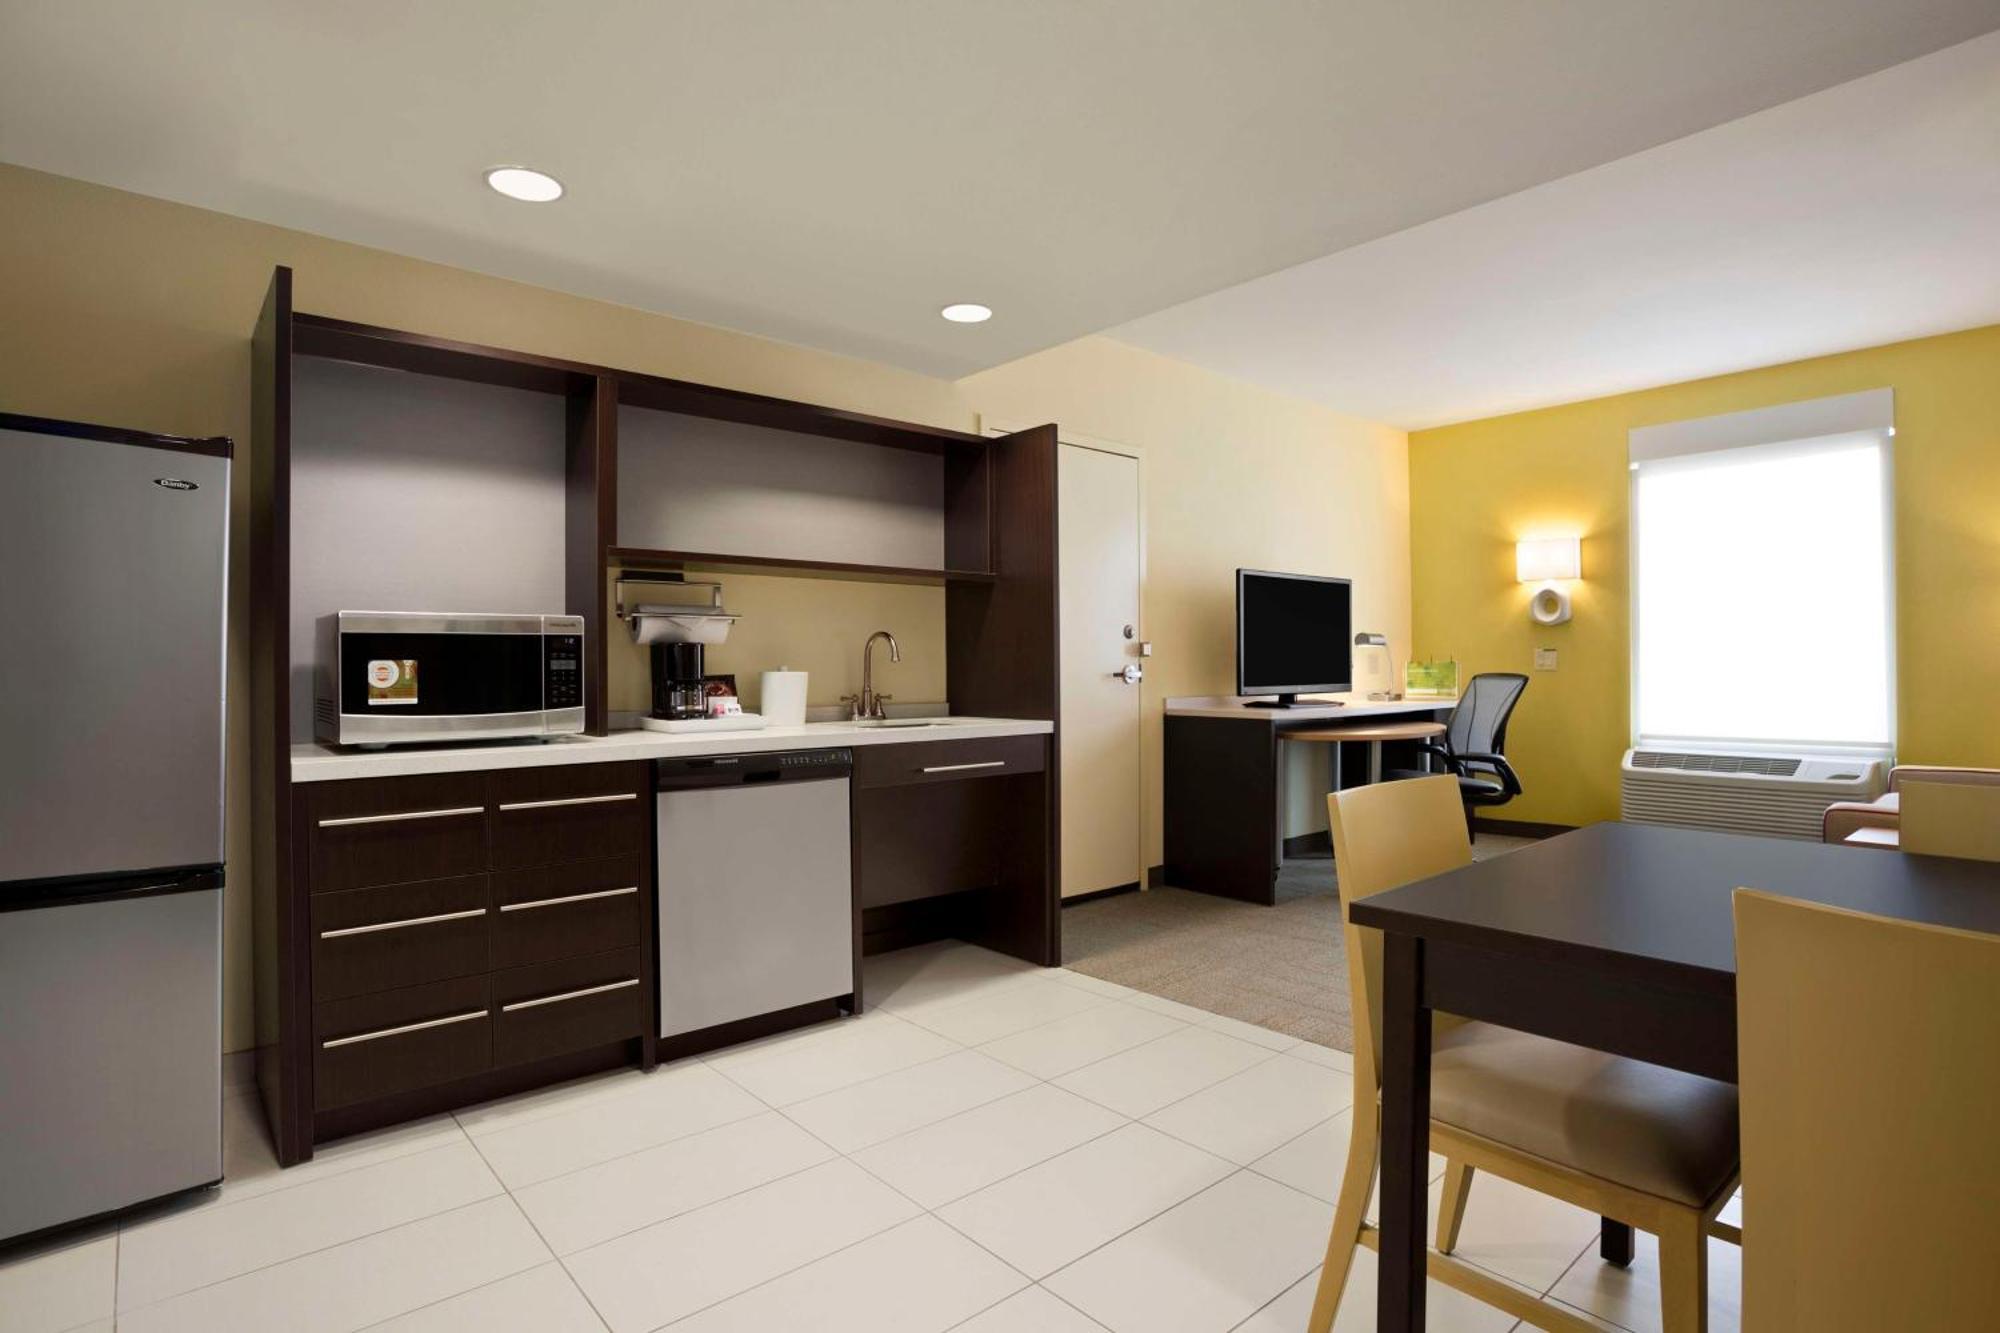 Home2 Suites By Hilton Greensboro Airport, Nc Buitenkant foto